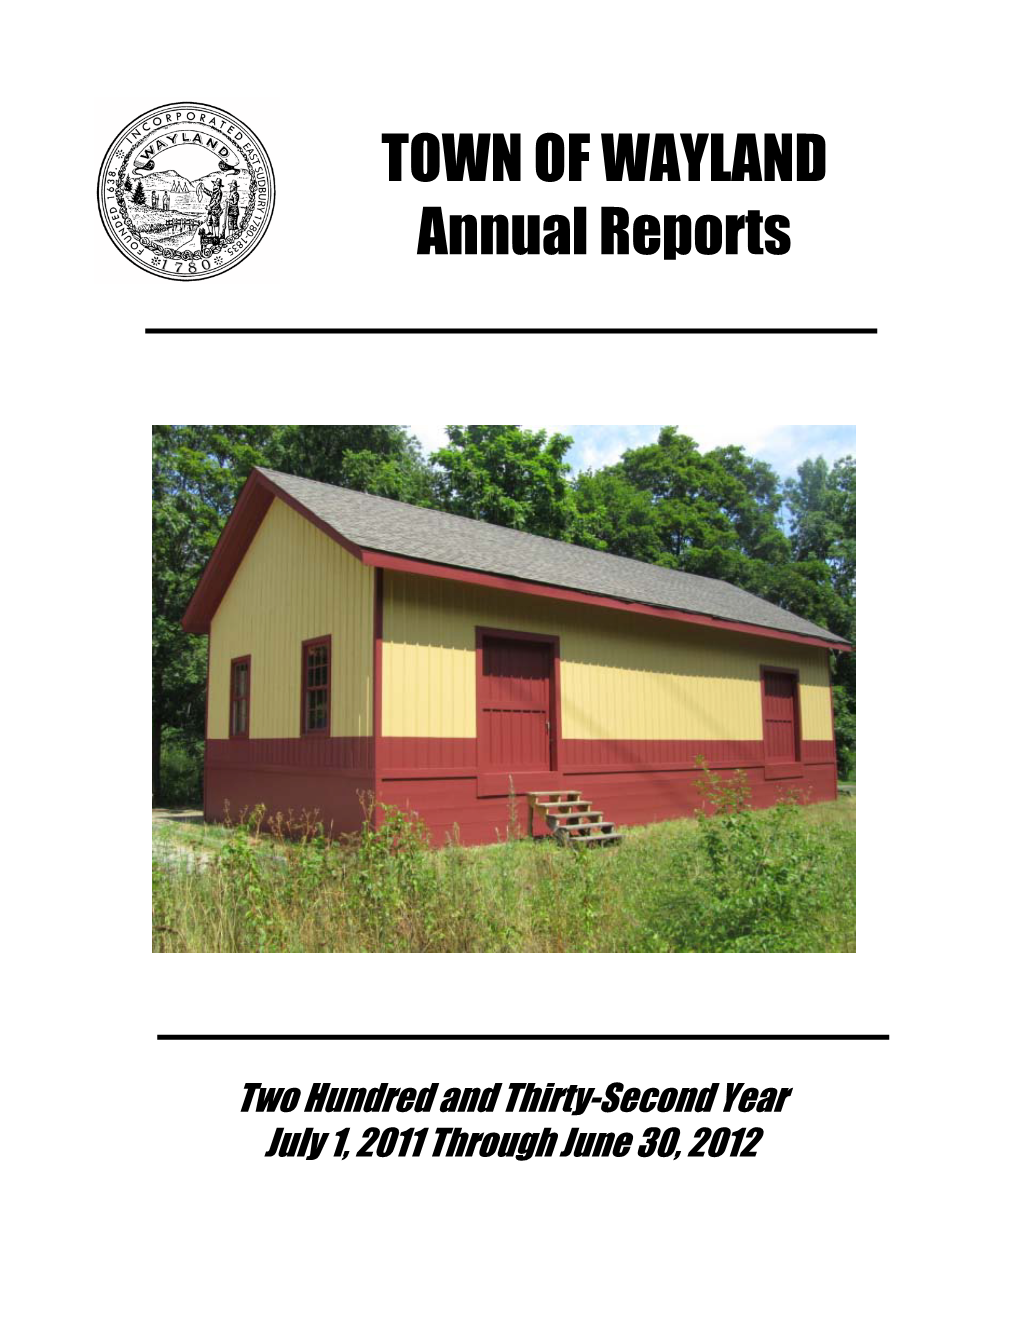 Annual Reports for the Town of Wayland for Its Two Hundred and Thirty-Second Municipal Year July 1, 2011 to June 30, 2012 Table of Contents